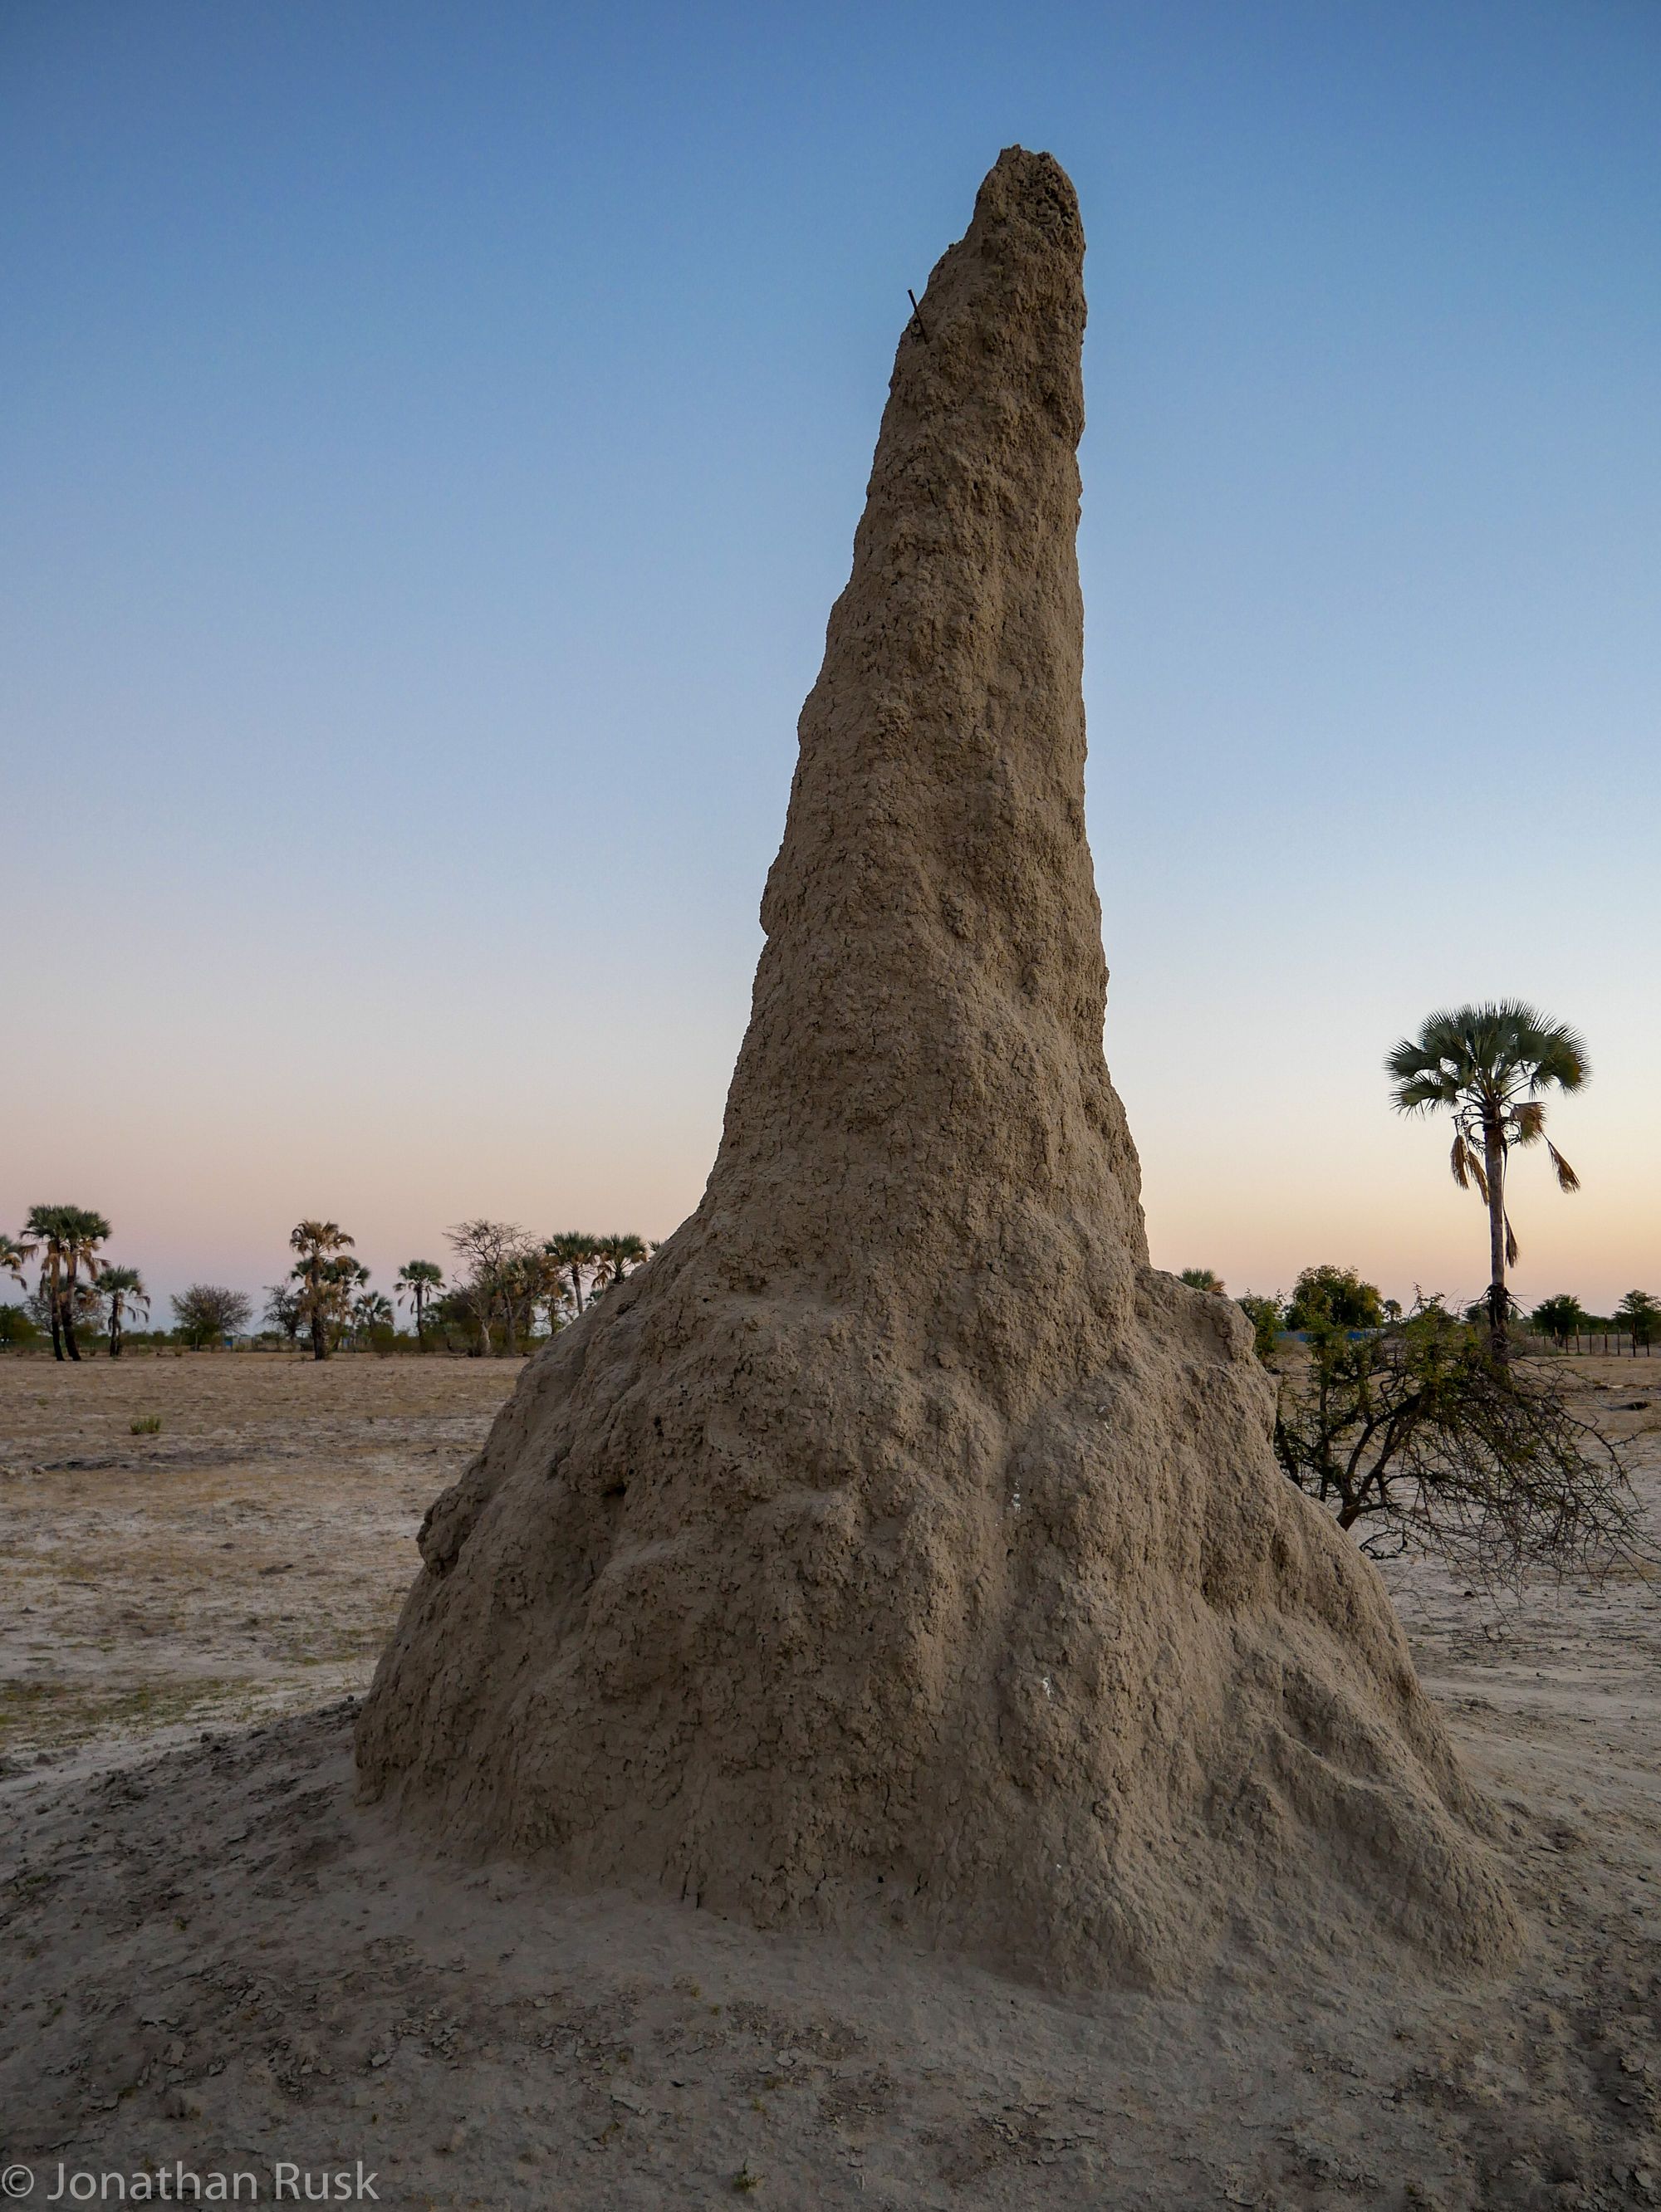 Termite mounds in Ovamboland